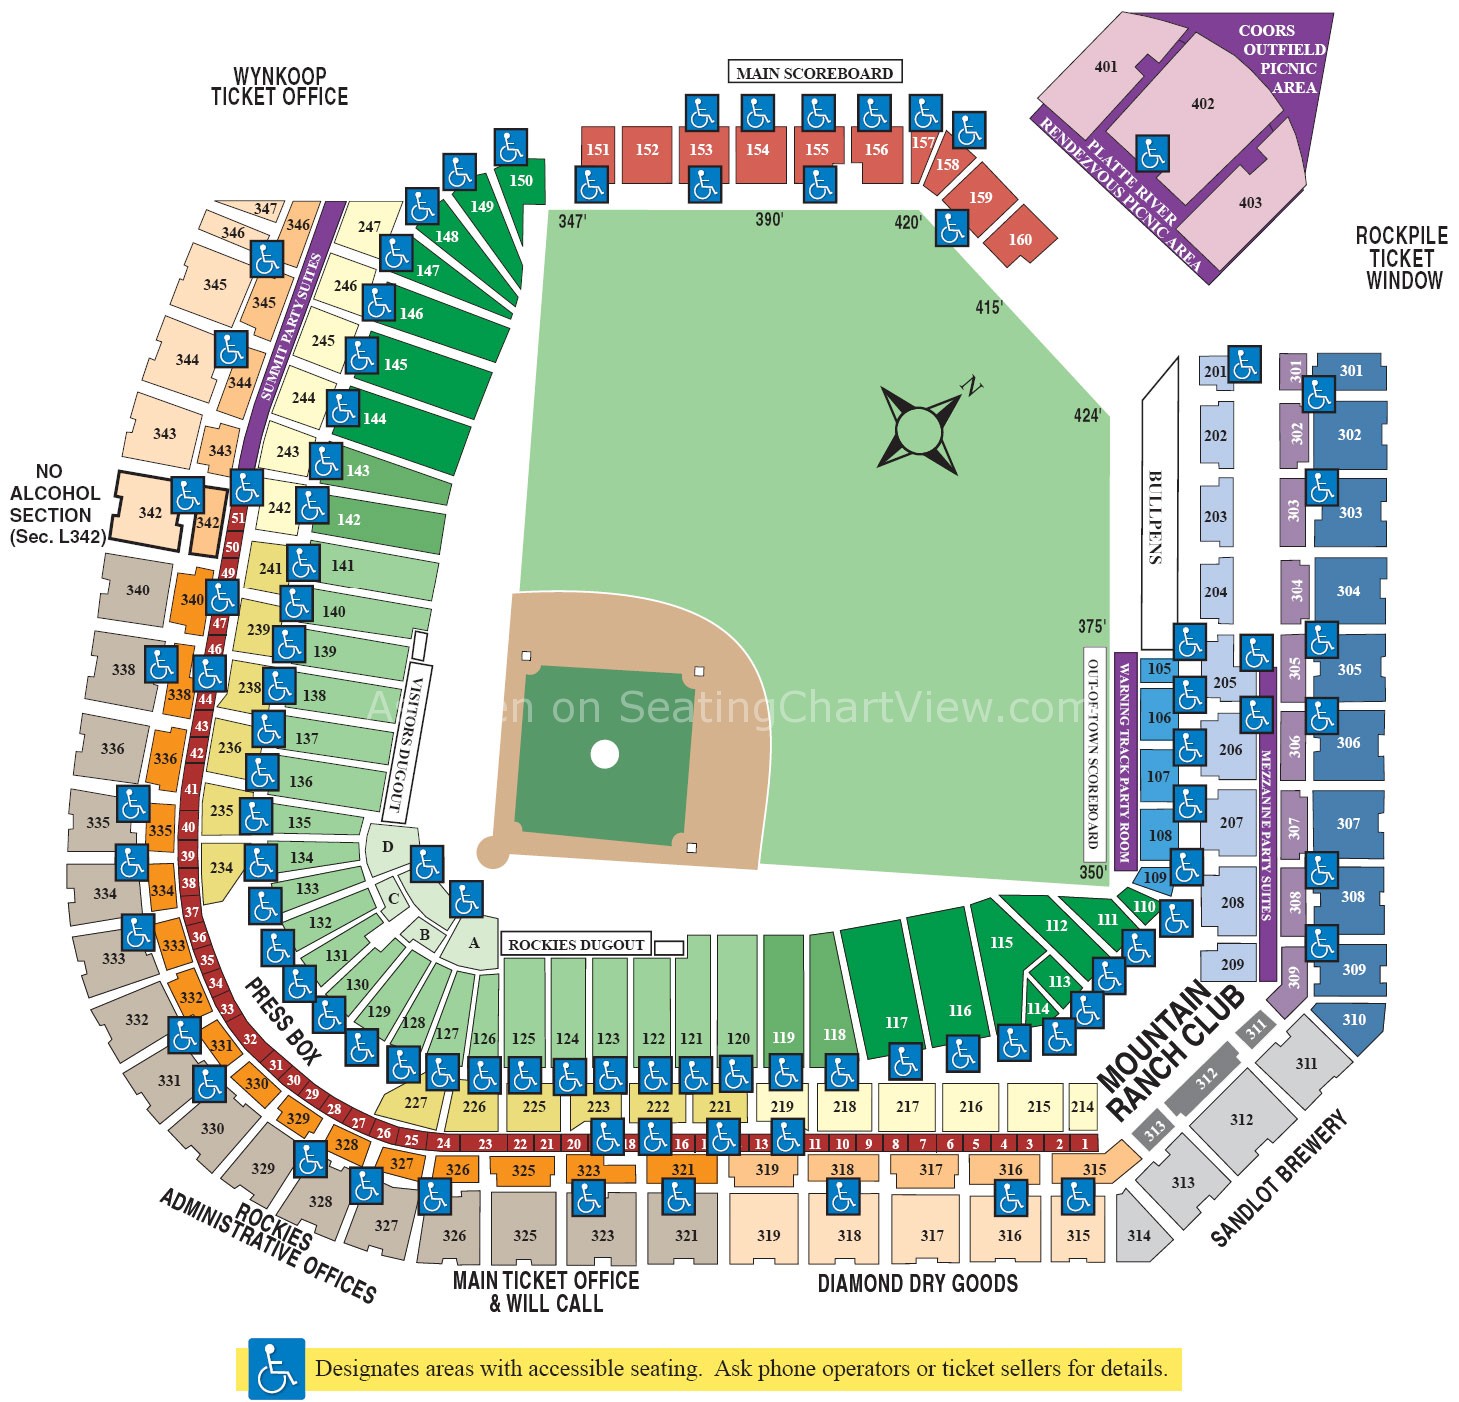 Coors Field Denver Co Seating Chart View Muzejvojvodine Org Rs